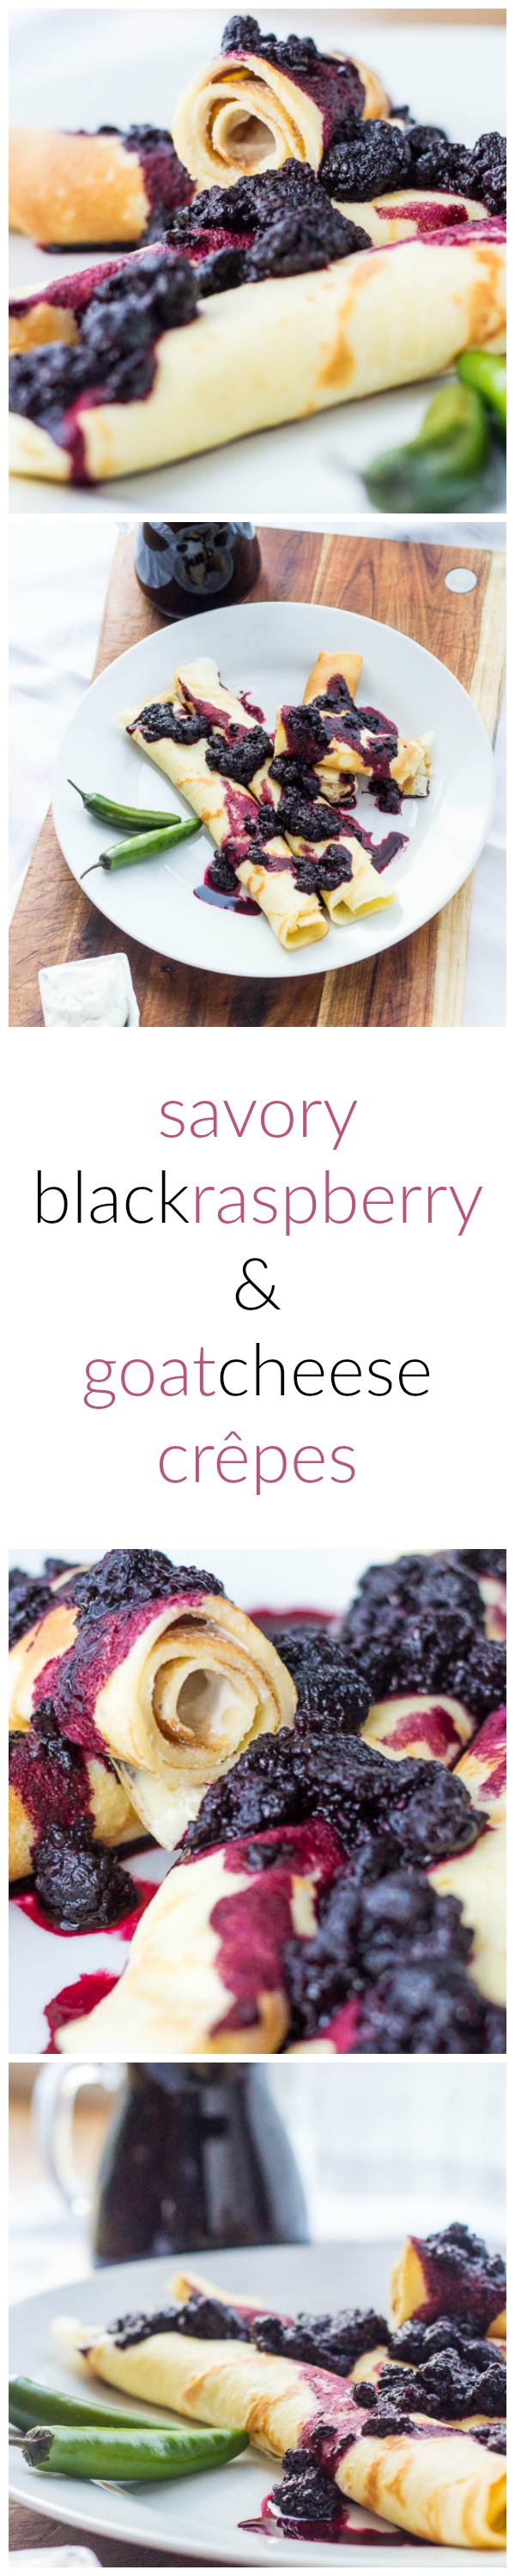 This recipe is a serious melding of savory and sweet, where serrrano chiles meet Oregon raspberries! Try these Savory Black Raspberry Goat Cheese Crêpes!